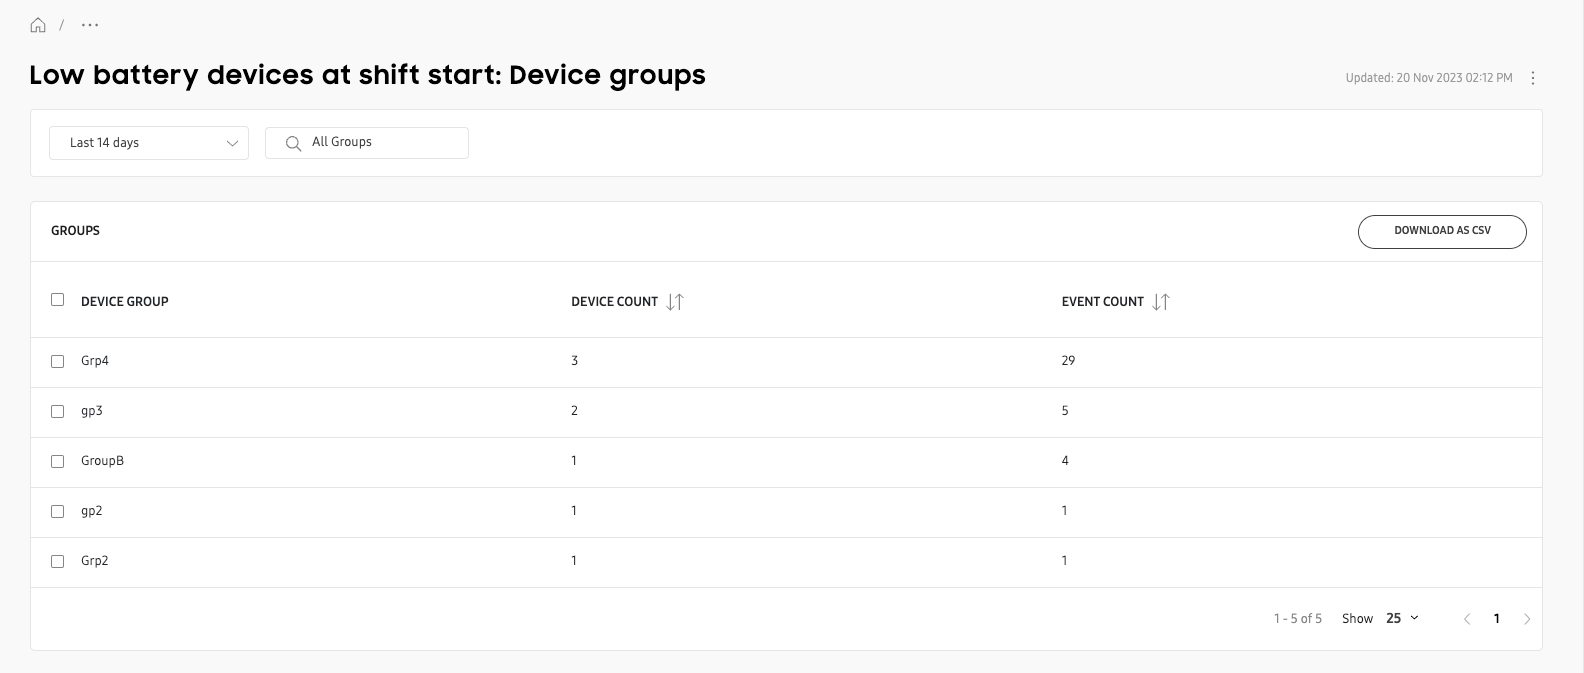 Expanded view: Groups with low battery start shift